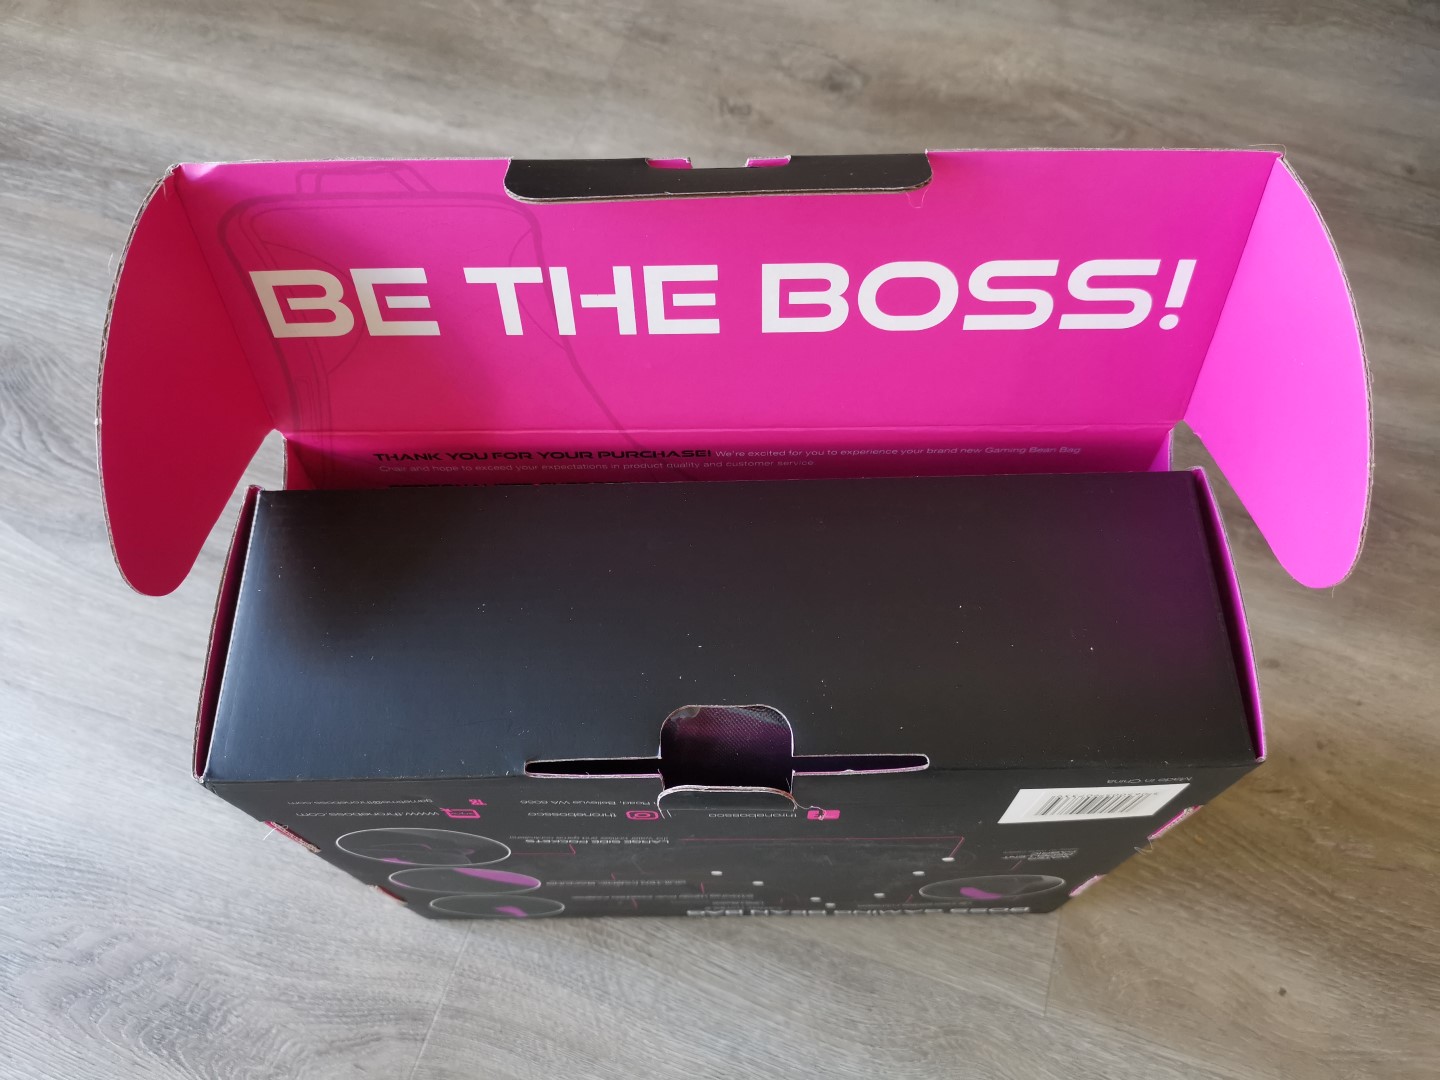 How to fill your gaming bean bag chair – Throne Boss USA